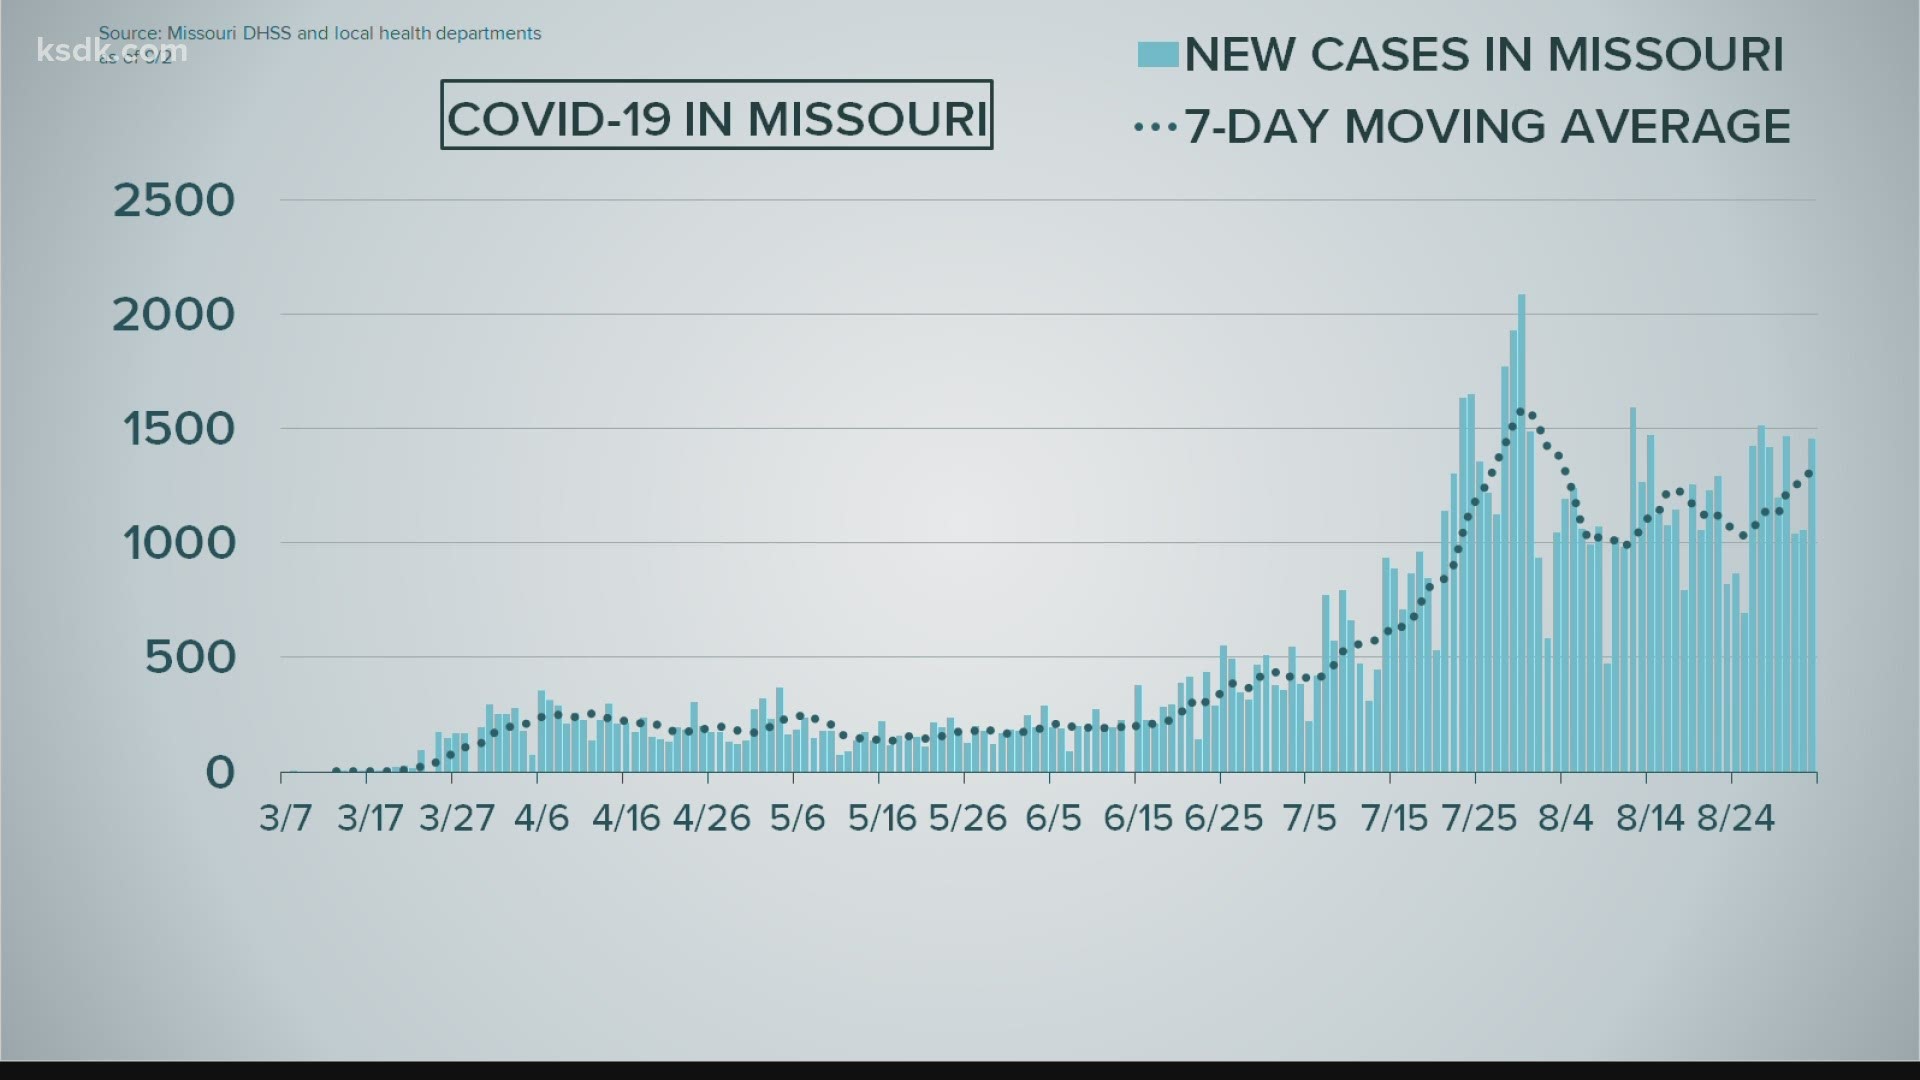 In the St. Louis area, the number of confirmed COVID-19 hospitalizations decreased